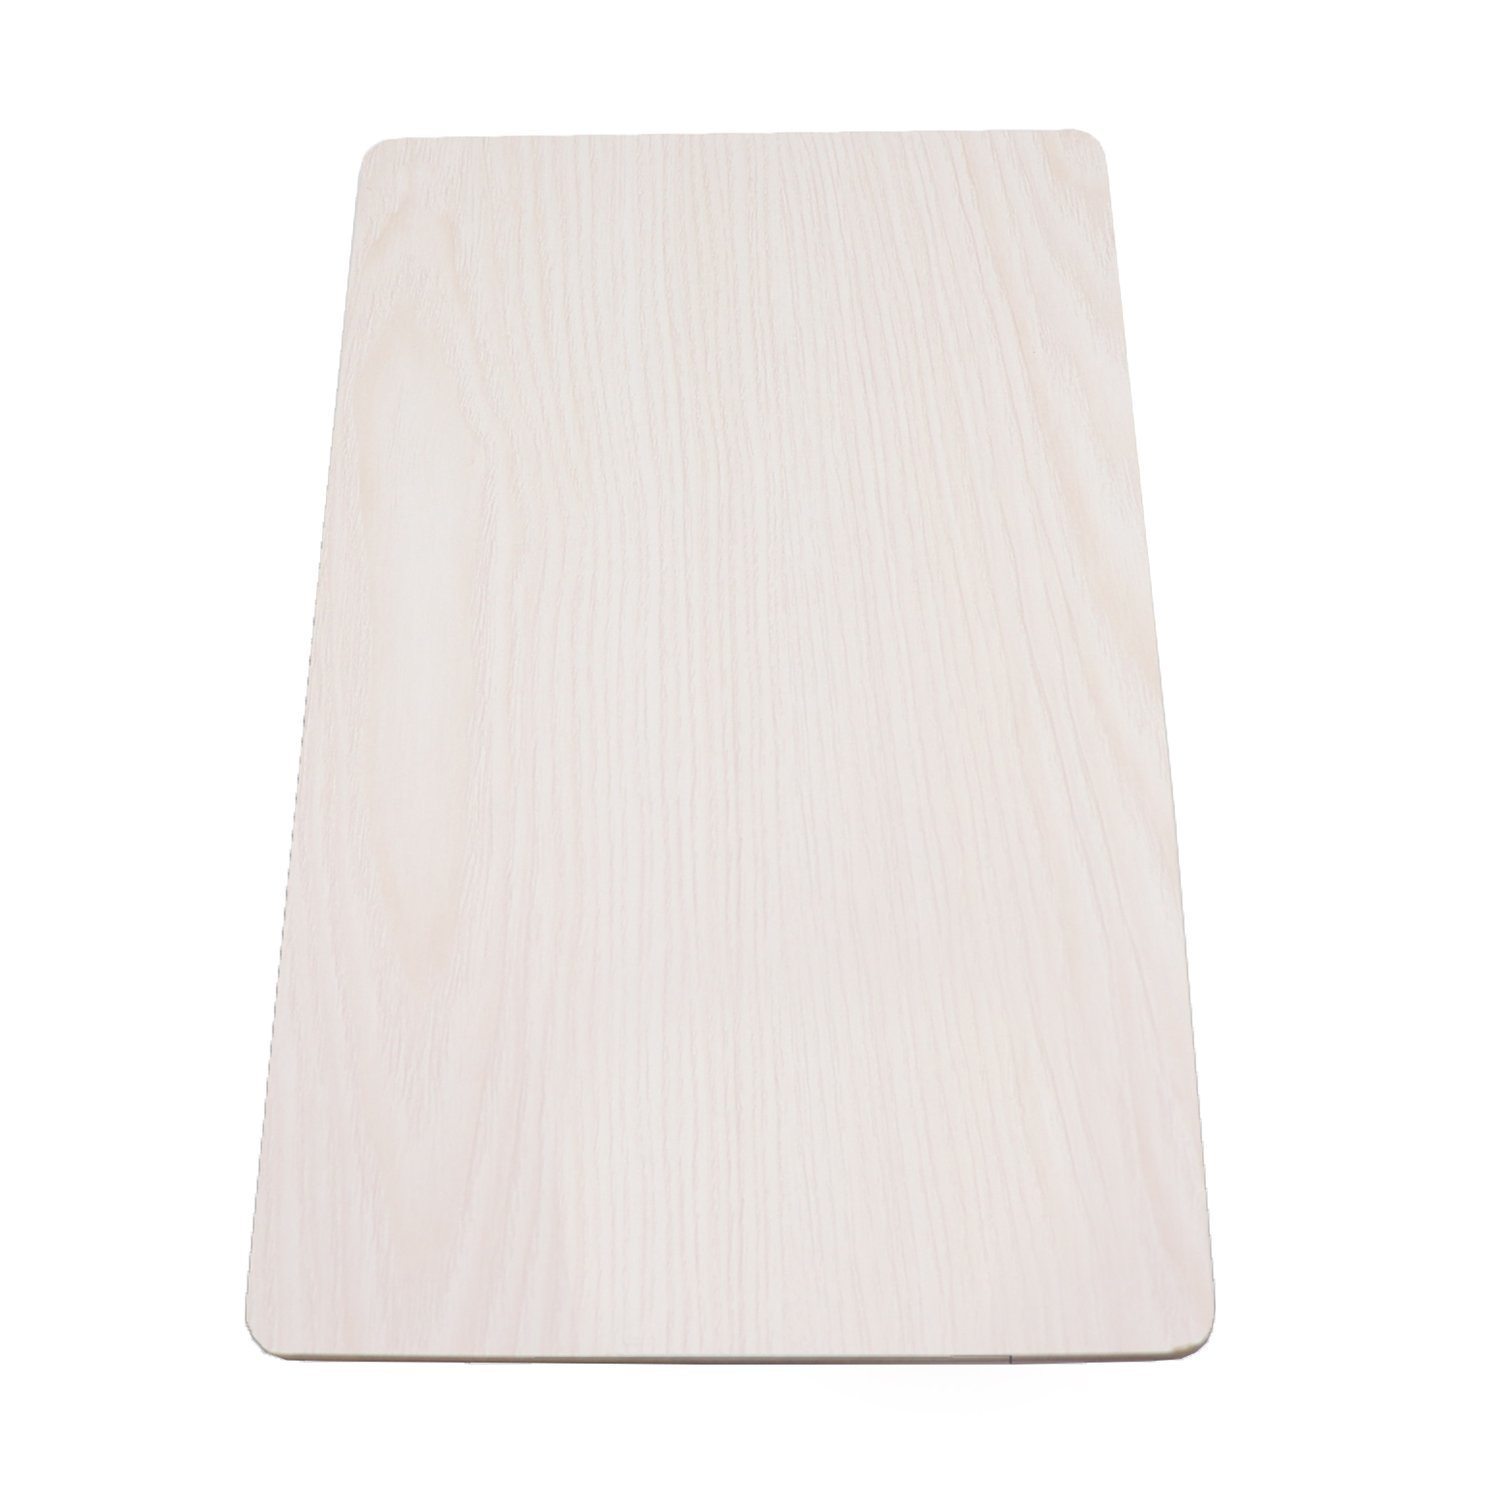 Excellent Grade Fancy Woodgrain Plywood Melamine Film Faced Plywood for Home Decoration